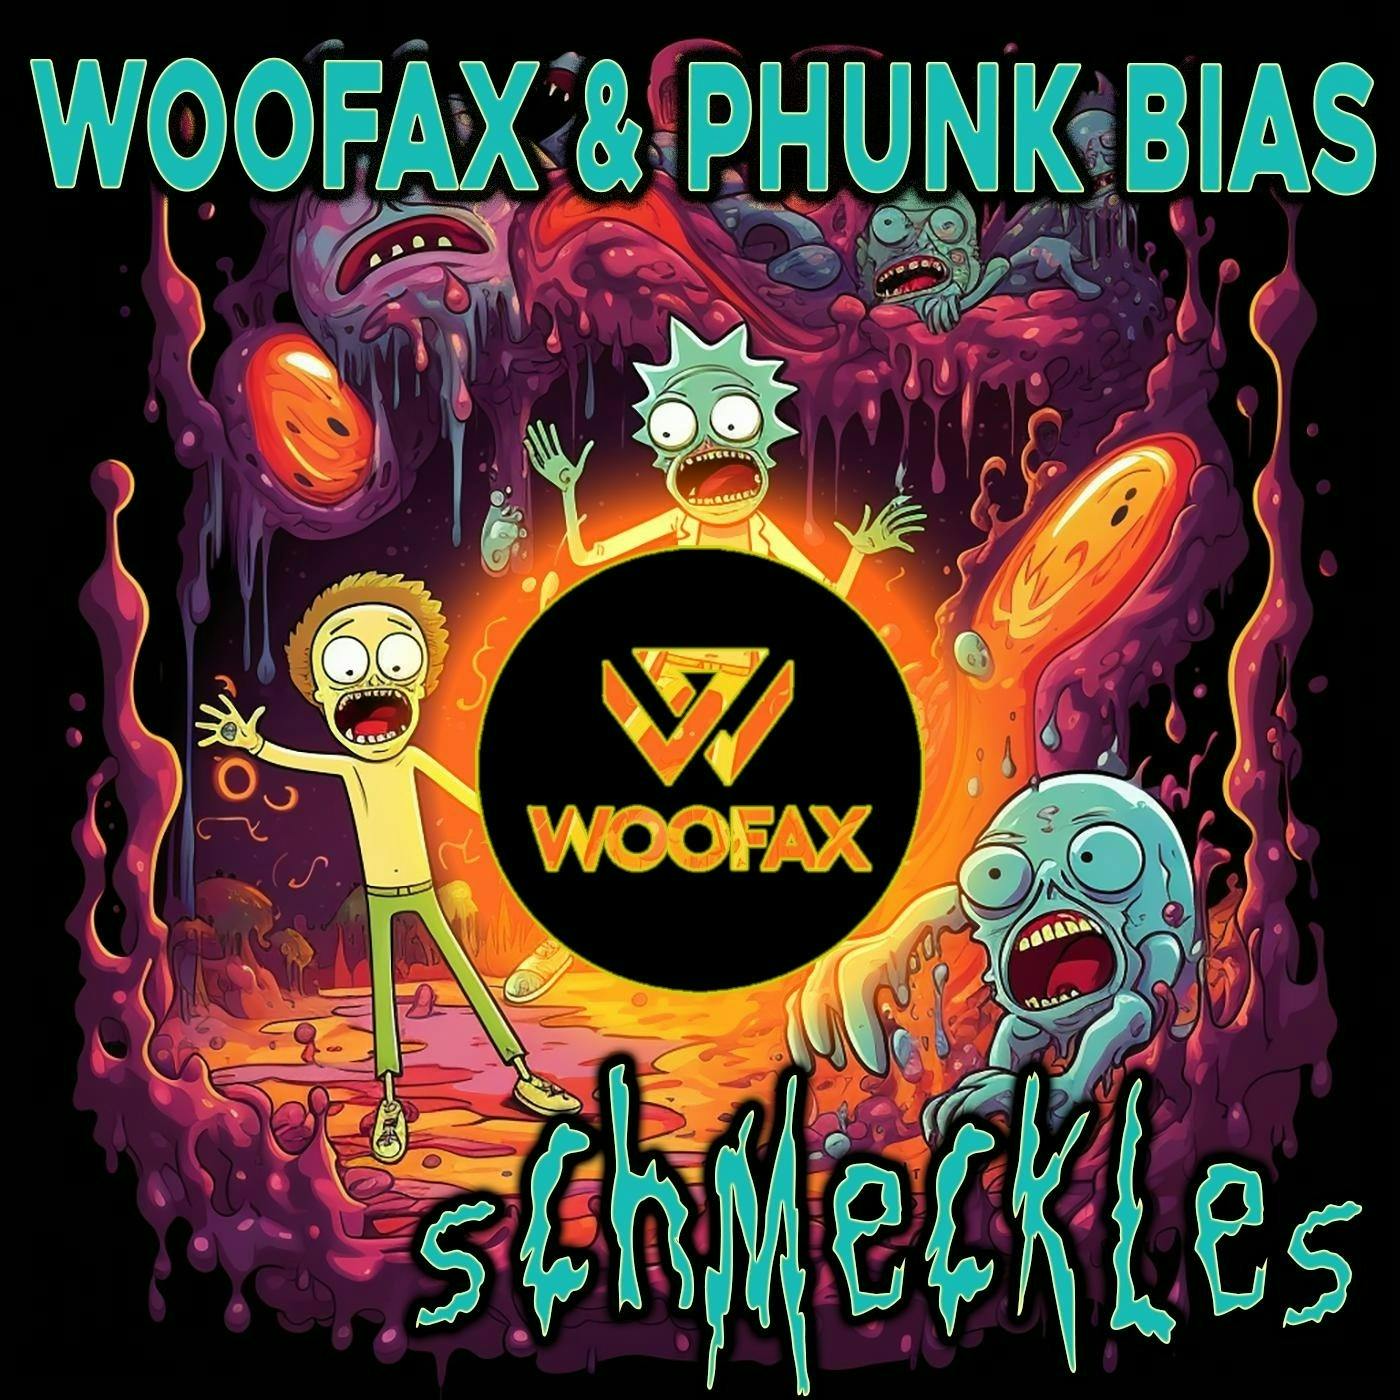 Schmeckles - With Punk Bias